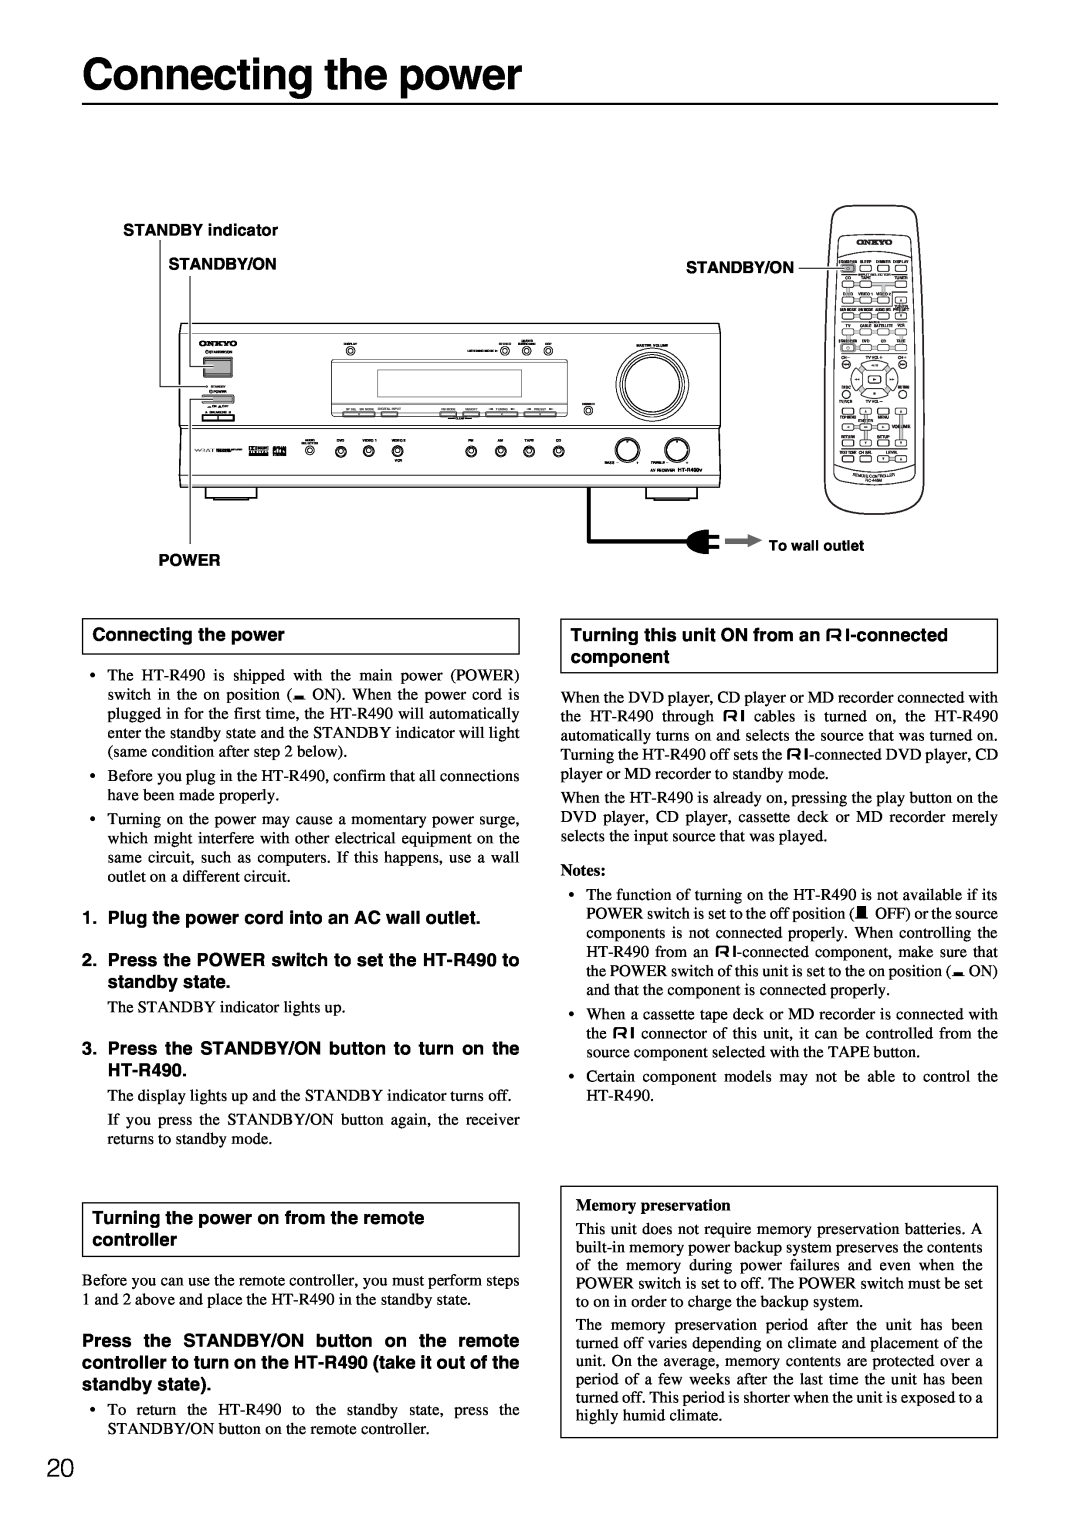 Onkyo HT-R490 appendix Connecting the power, STANDBY indicator, Standby/On, Power, Notes, Memory preservation 